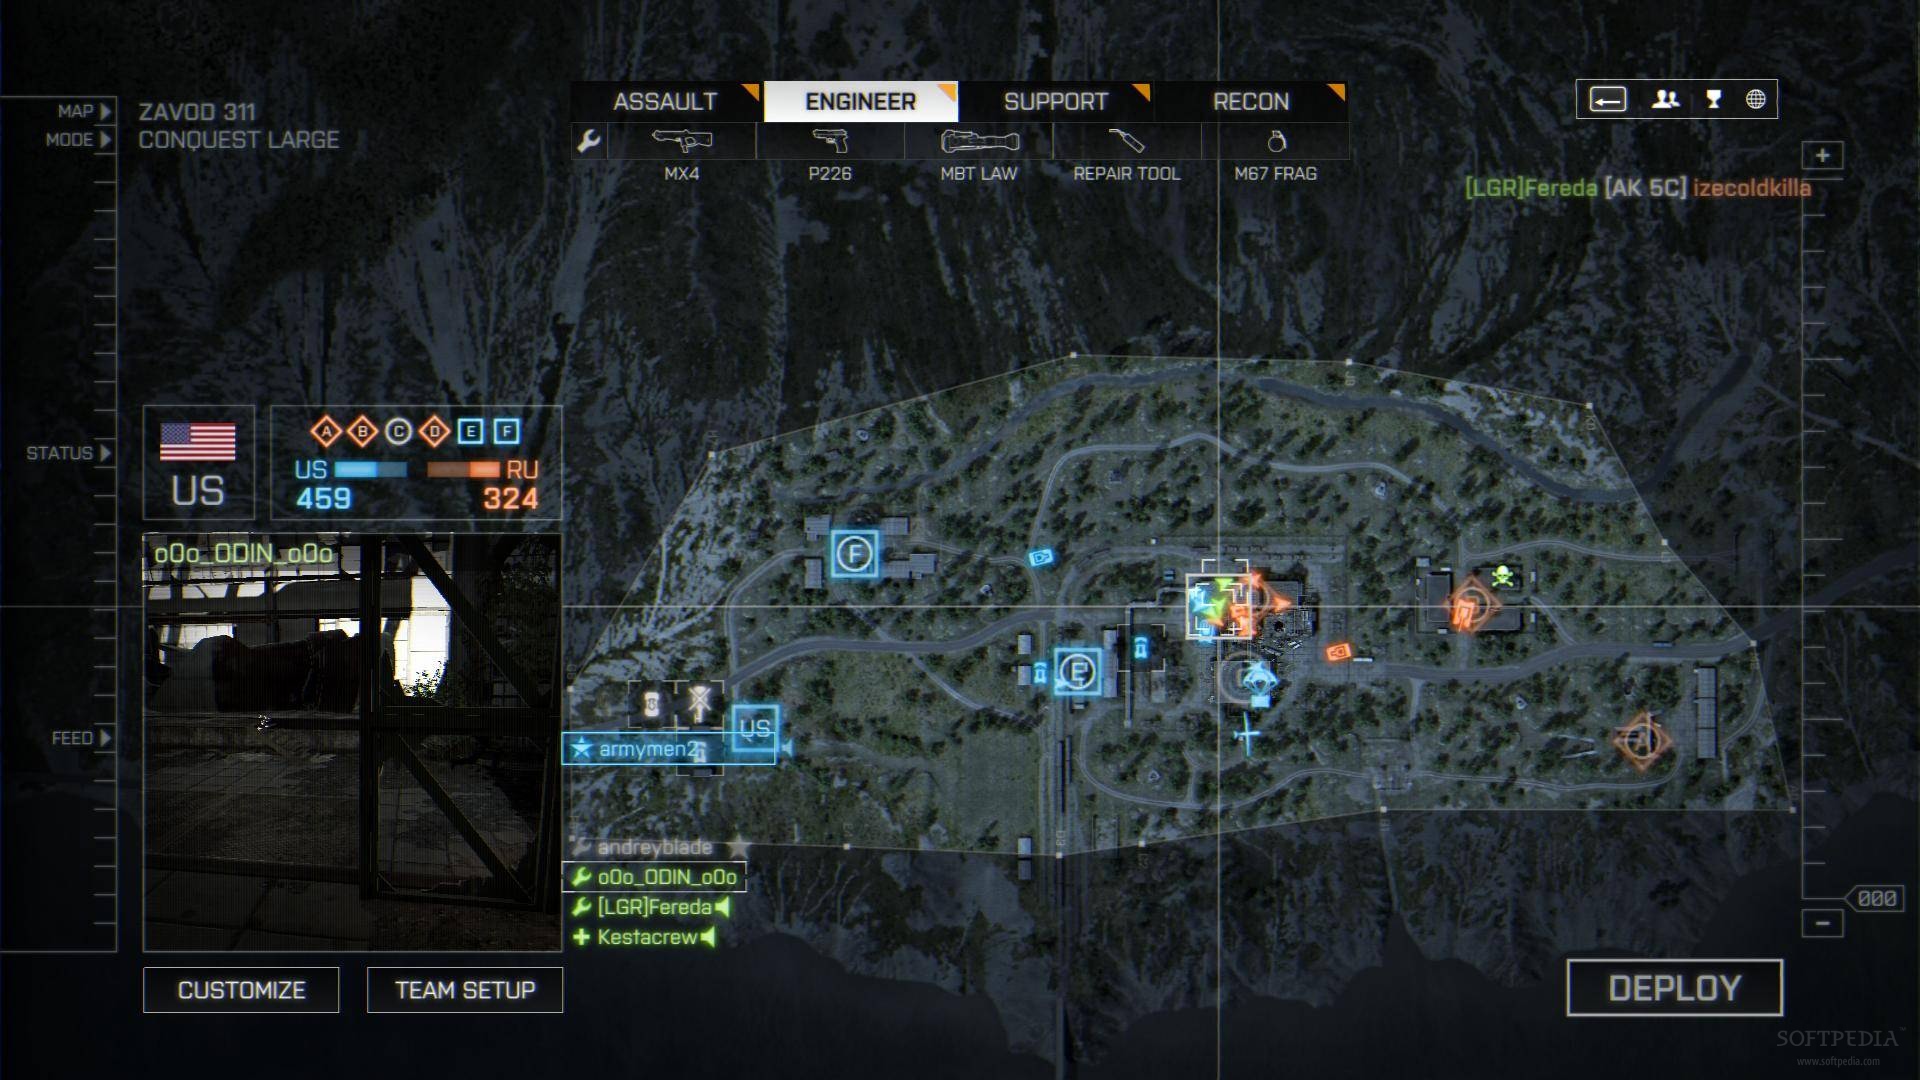 Are there still Battlefield 4 servers that play DLC maps? - Quora